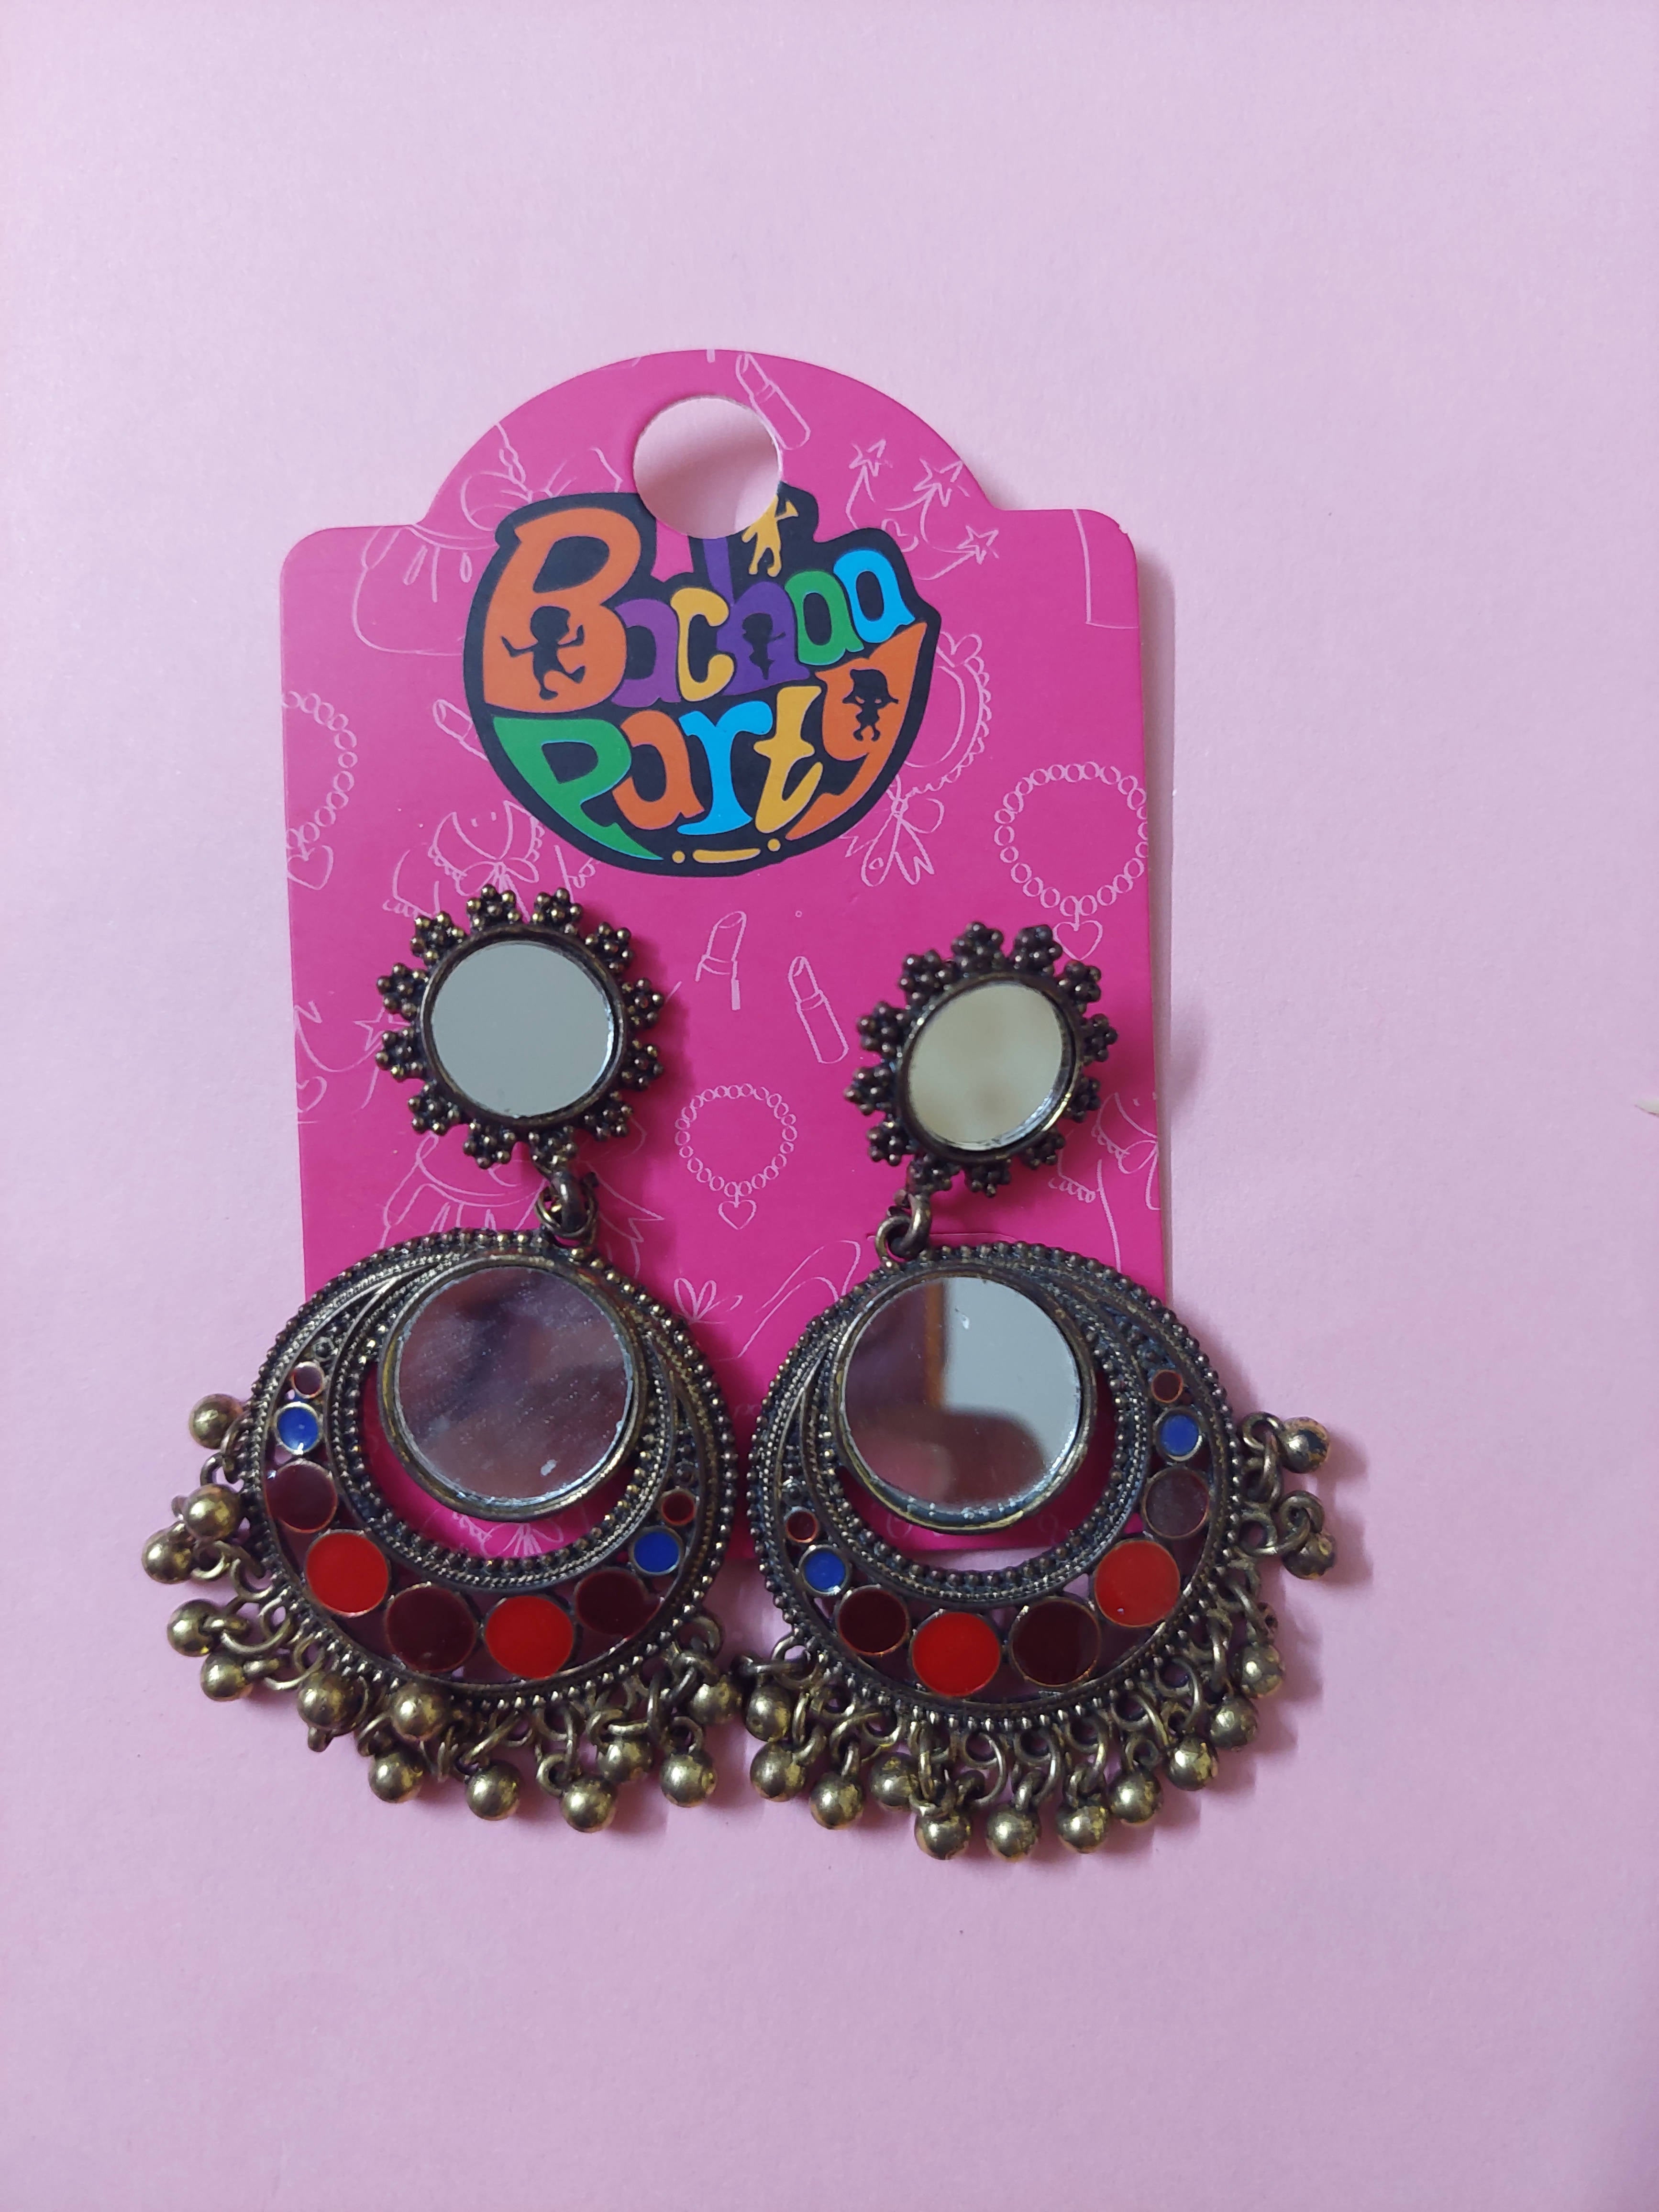 Bacha Party | Silver Mirror Earrings | Girls Jewelry | Brand New